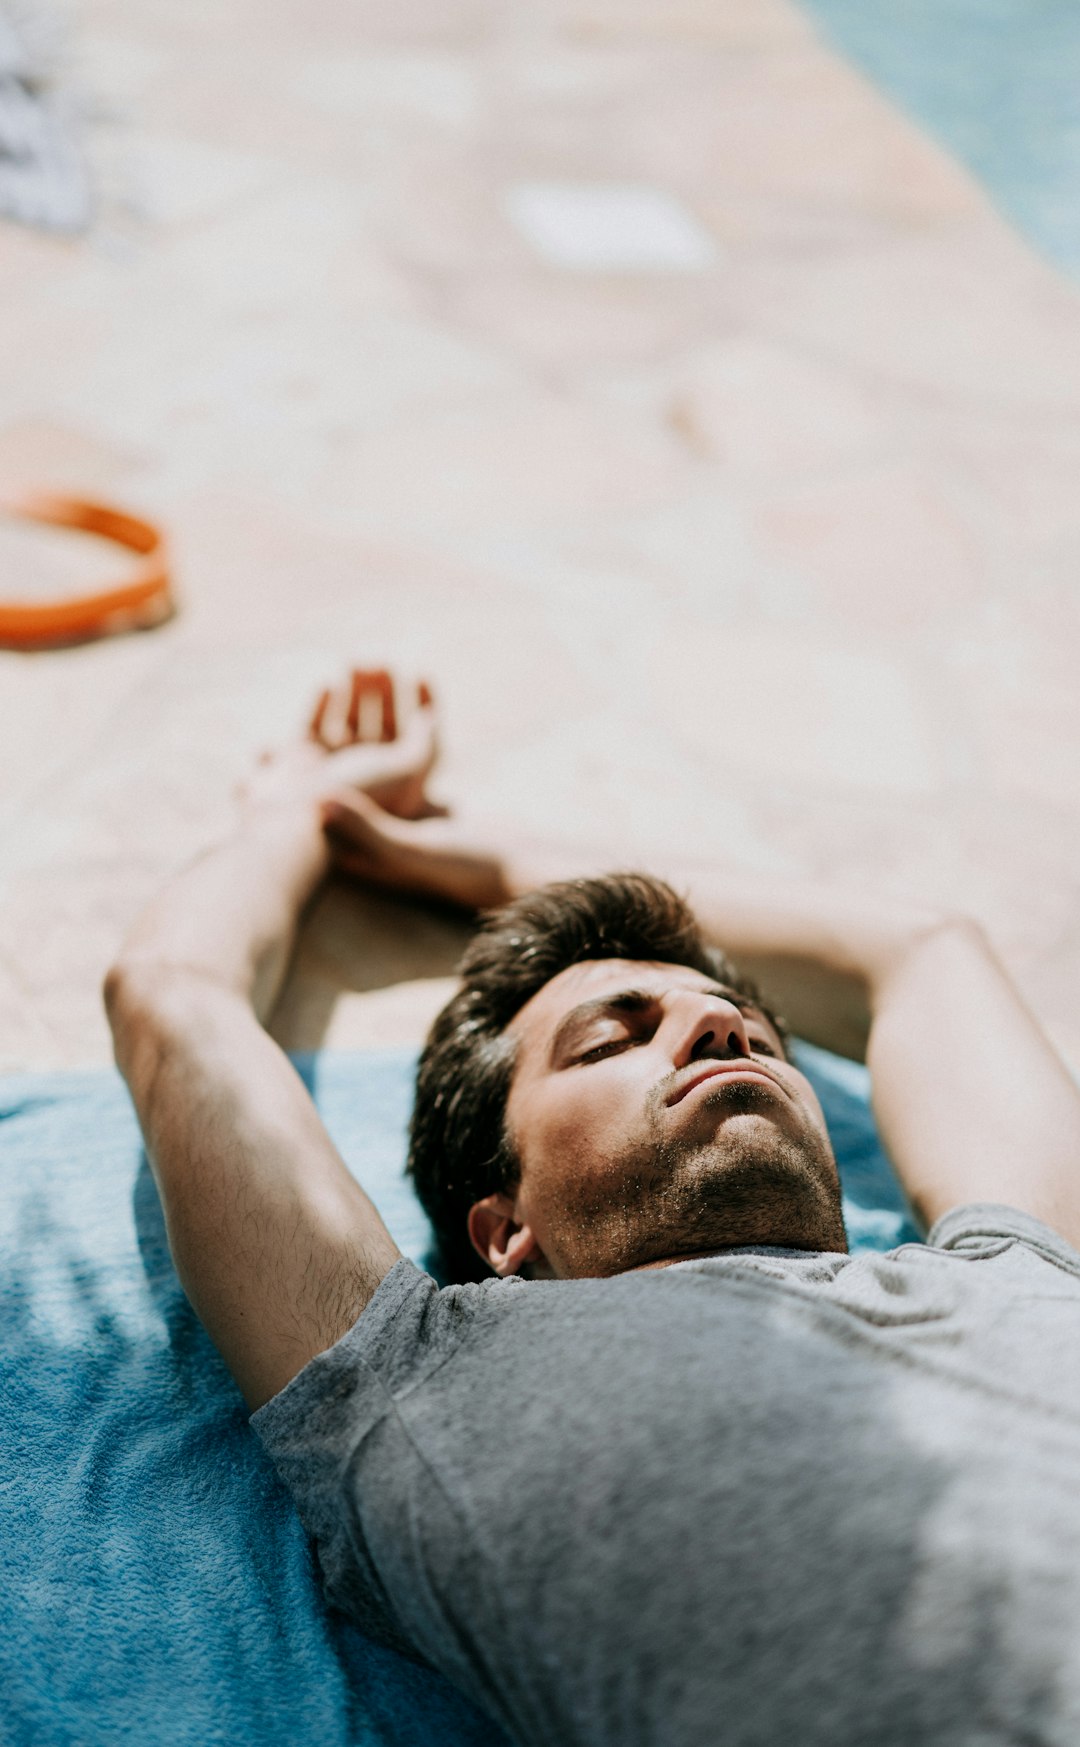 selective focus photography of man lying on blue cushion during daytime